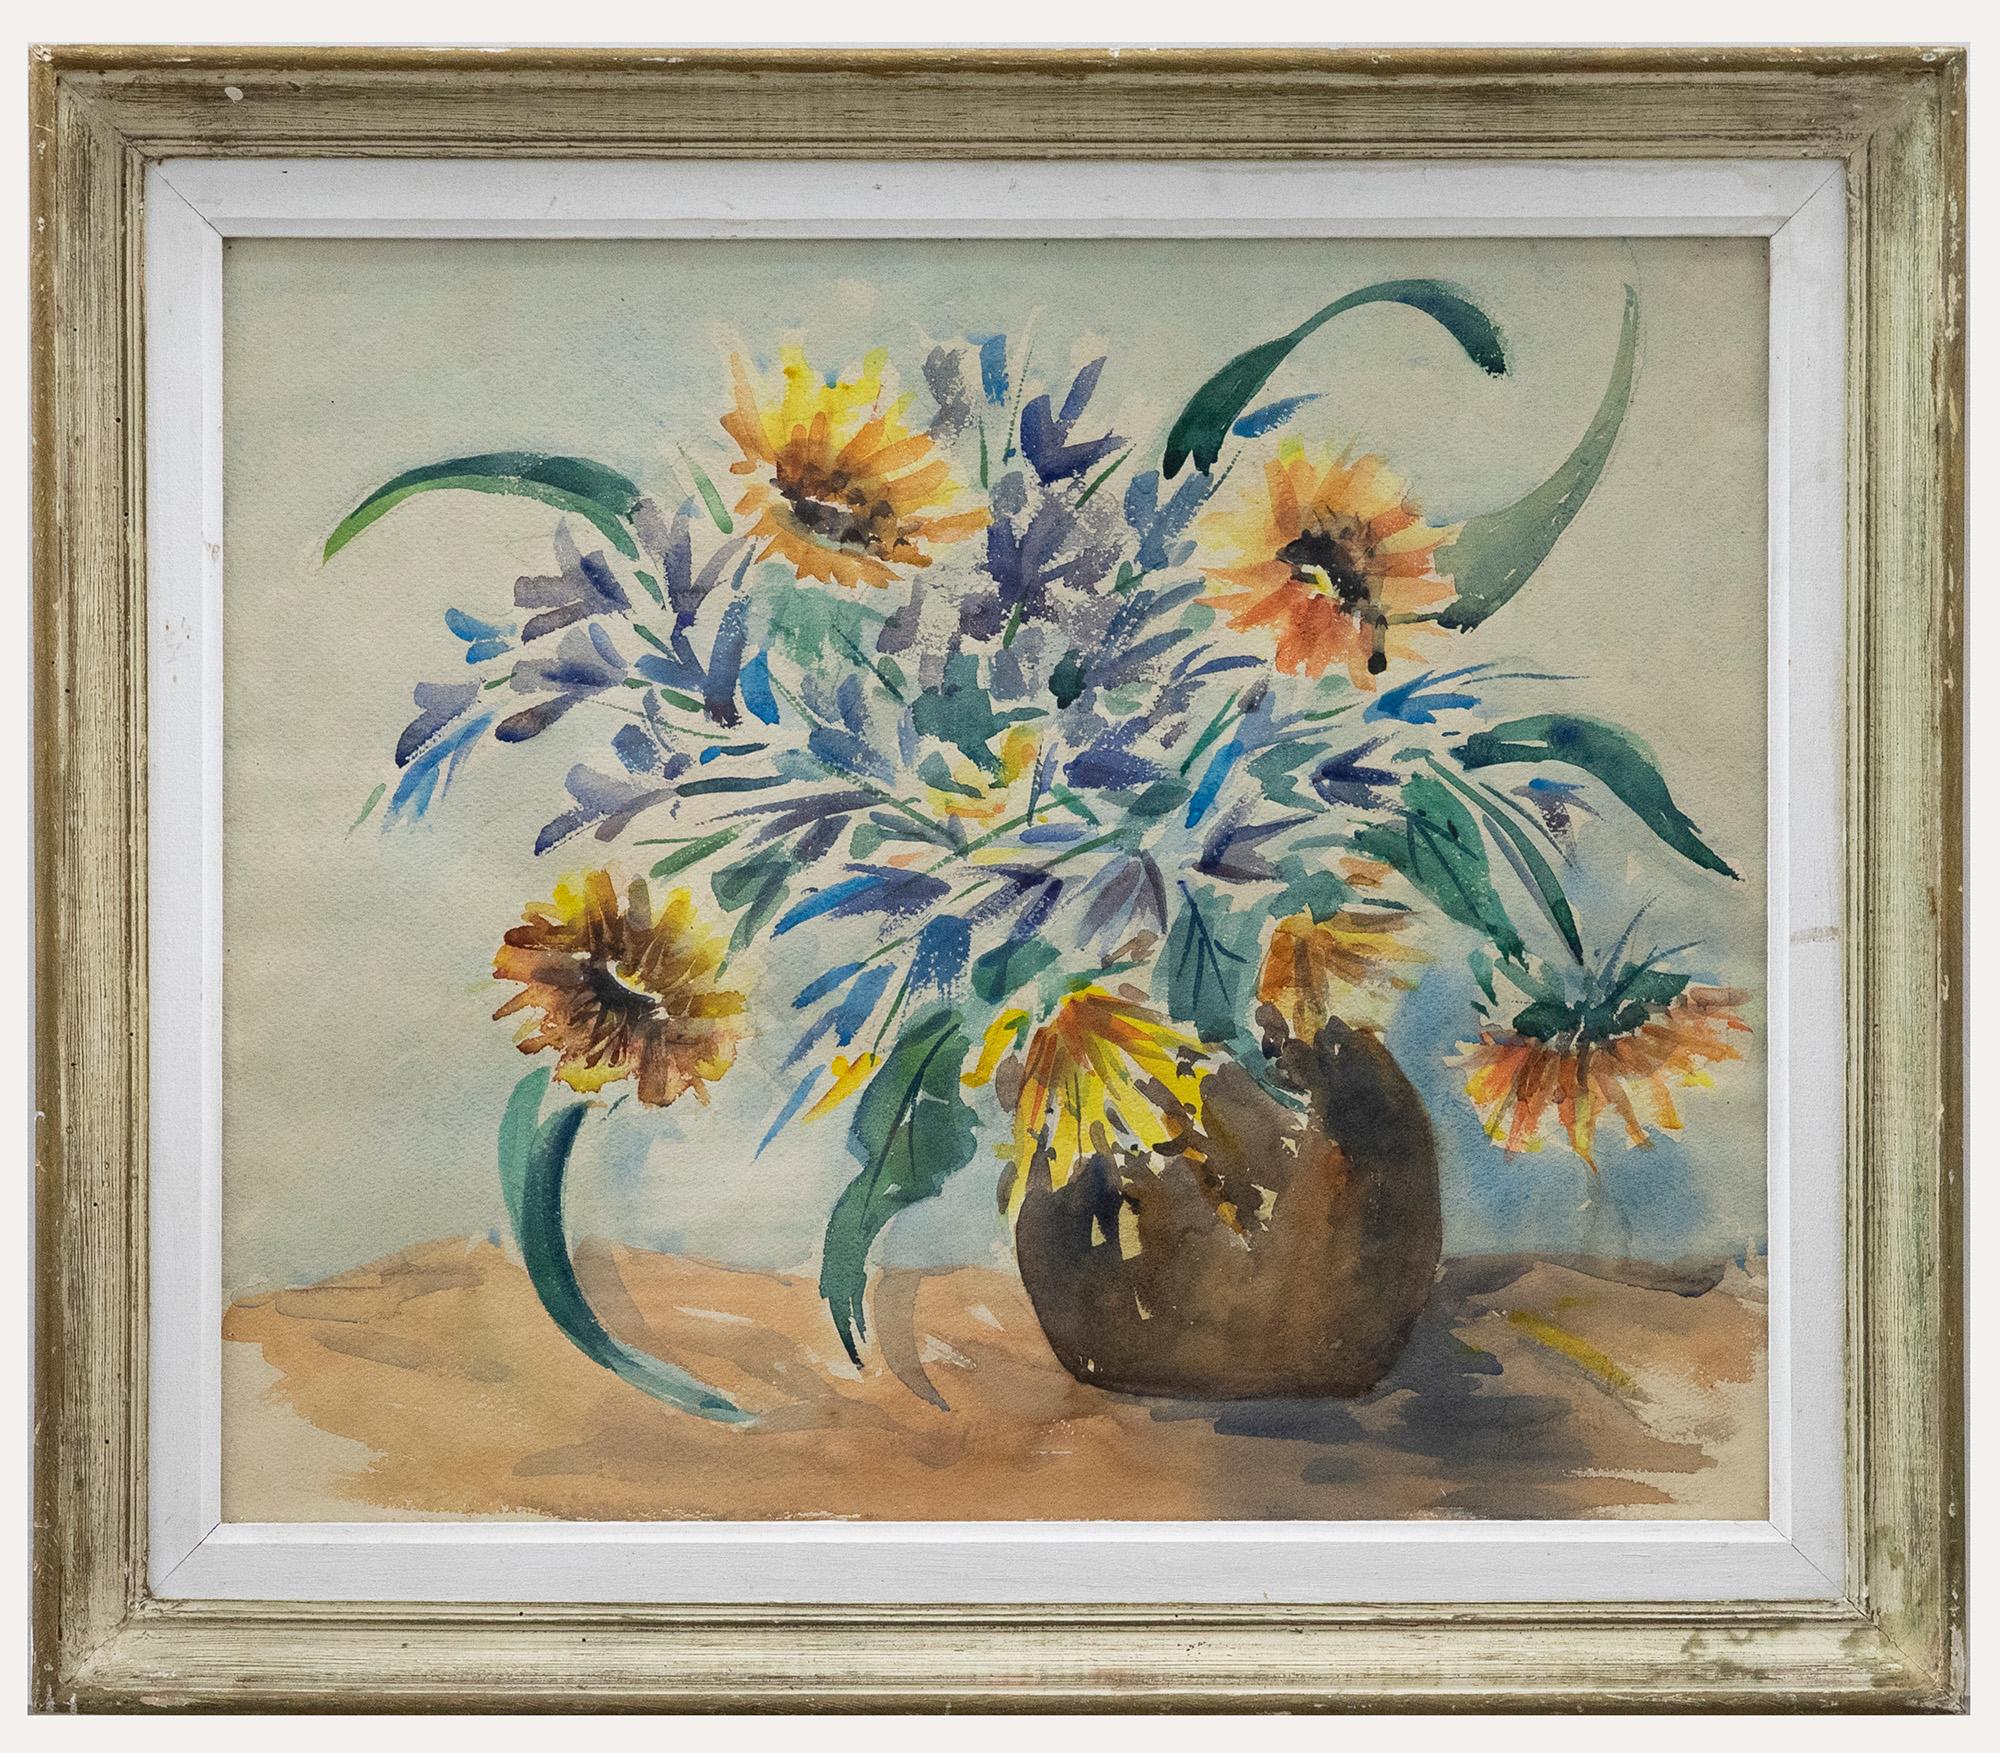 Unknown Still-Life - Framed 20th Century Watercolour - Sunflowers & Salvias